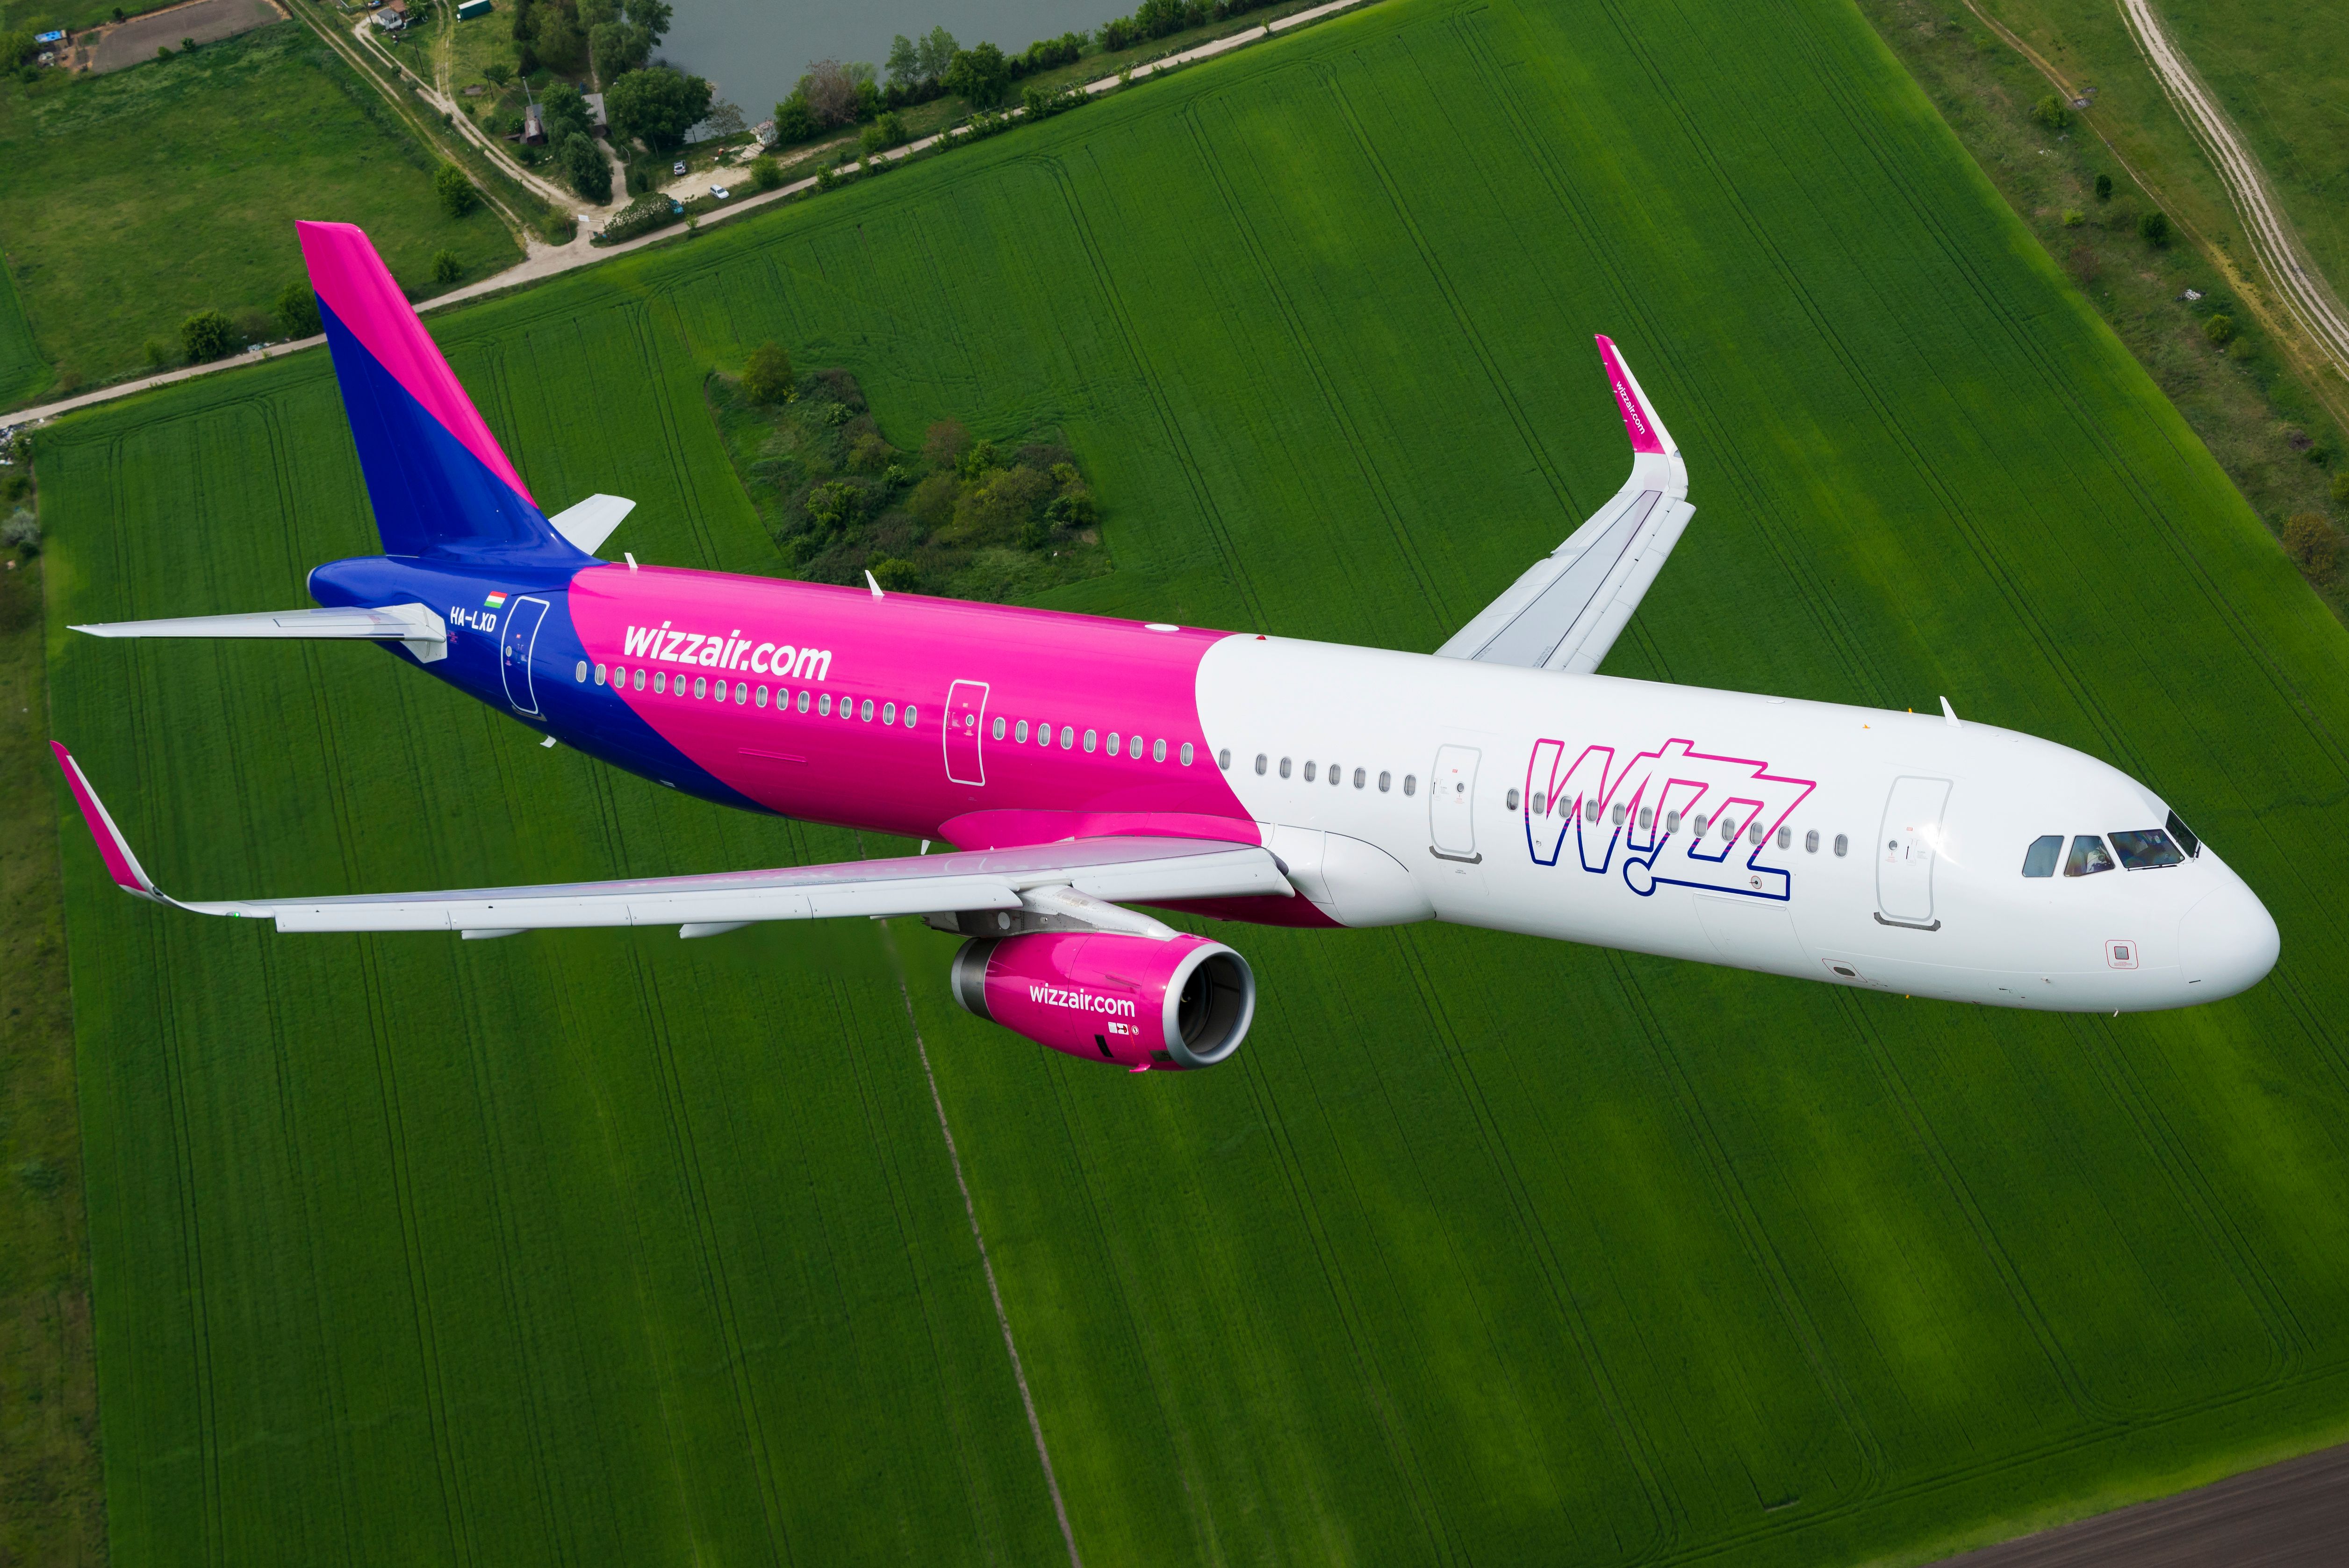 Wizz Air Airbus A321 flying over a green field